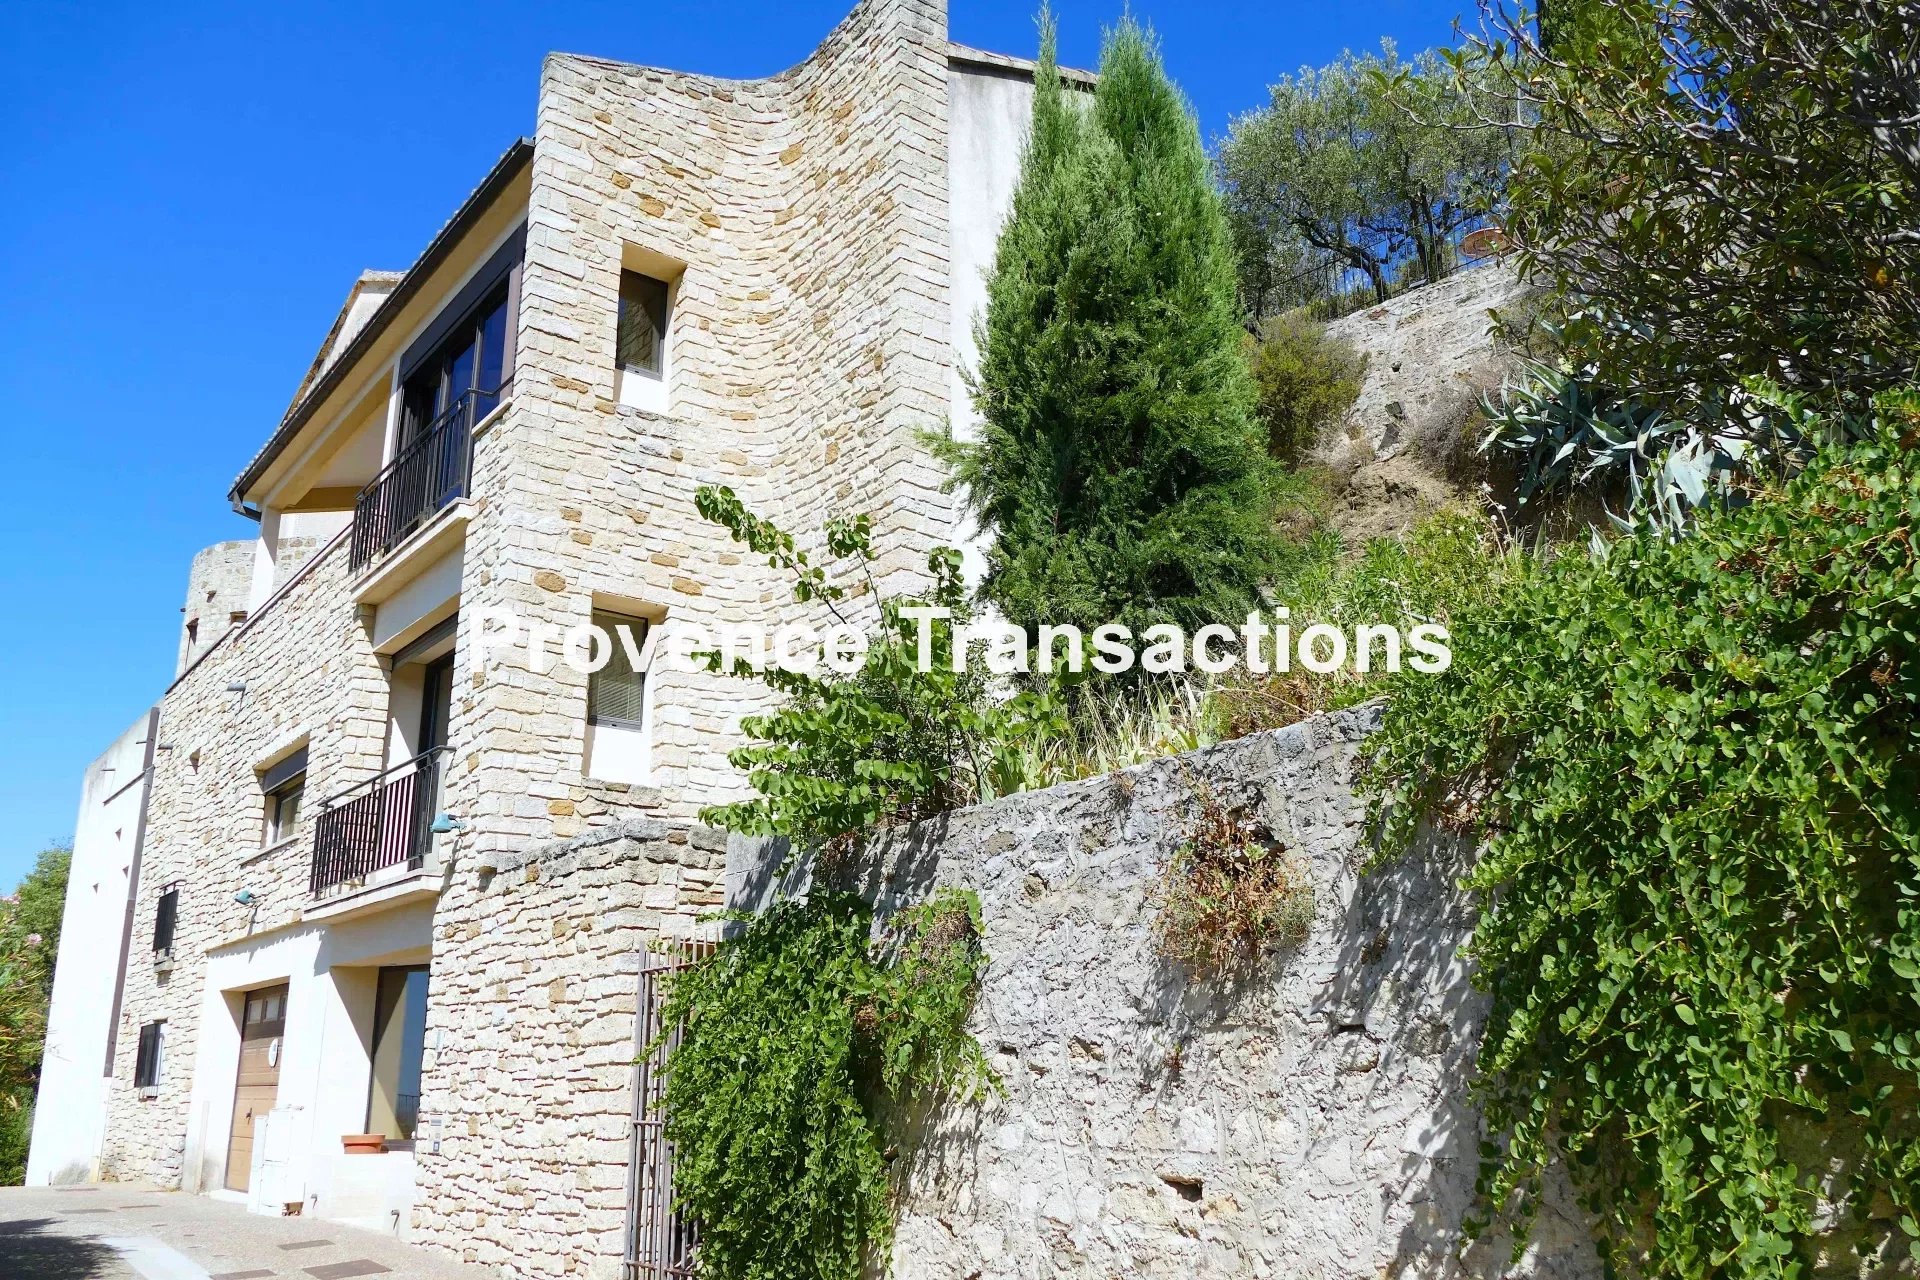 VENTE REALISEE / PROVENCE TRANSACTIONS